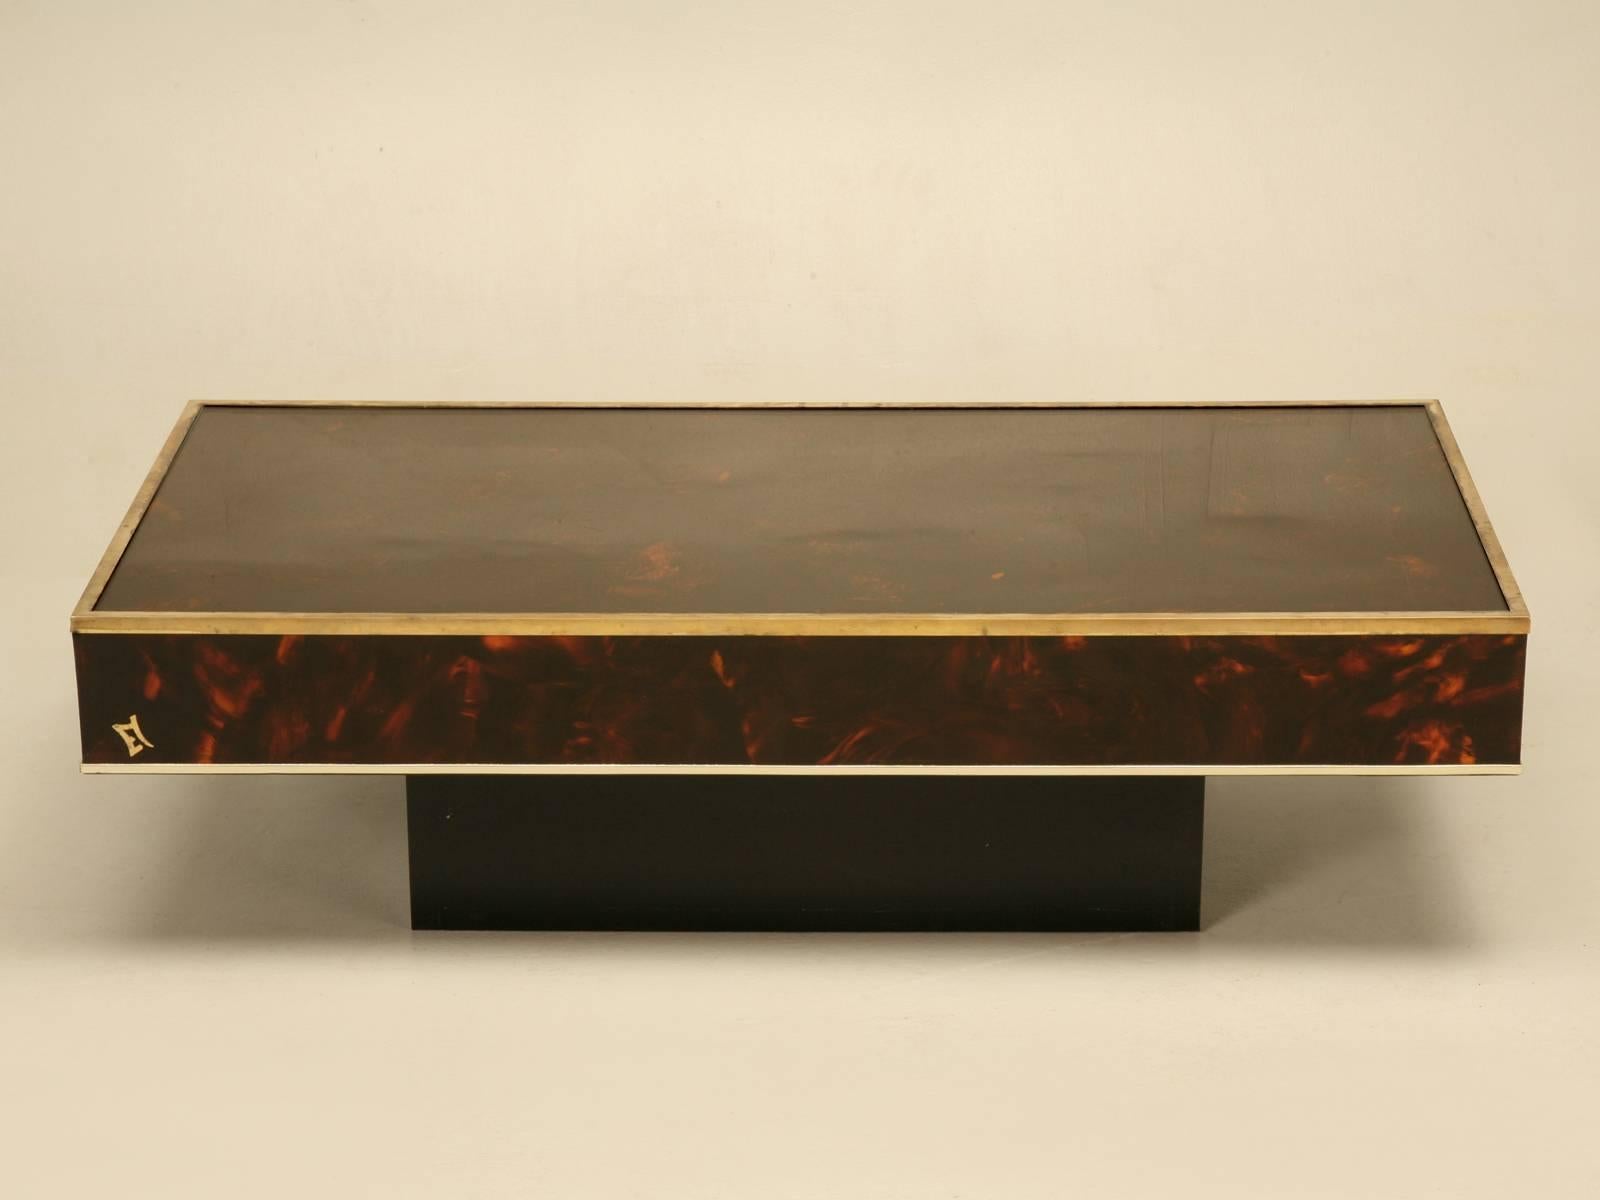 Great looking French Mid-Century Modern faux tortoise shell and brass coffee table probably made in the early 1970s. There are the normal light surface scratches on the surface that one would expect, but all in all, it is in quite nice condition and